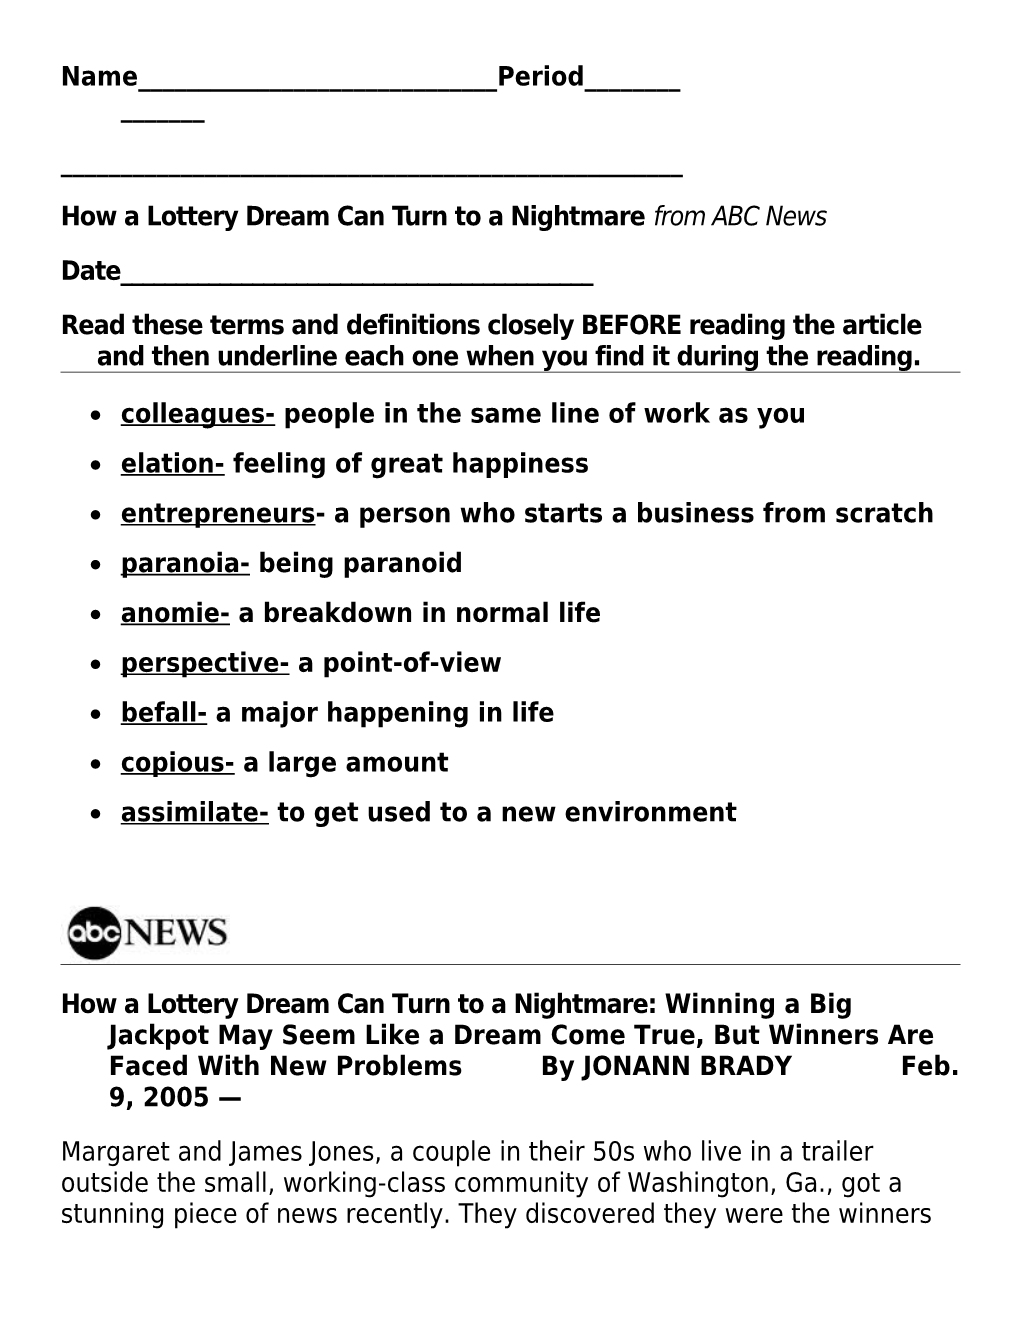 How a Lottery Dream Can Turn to a Nightmarefrom ABC News